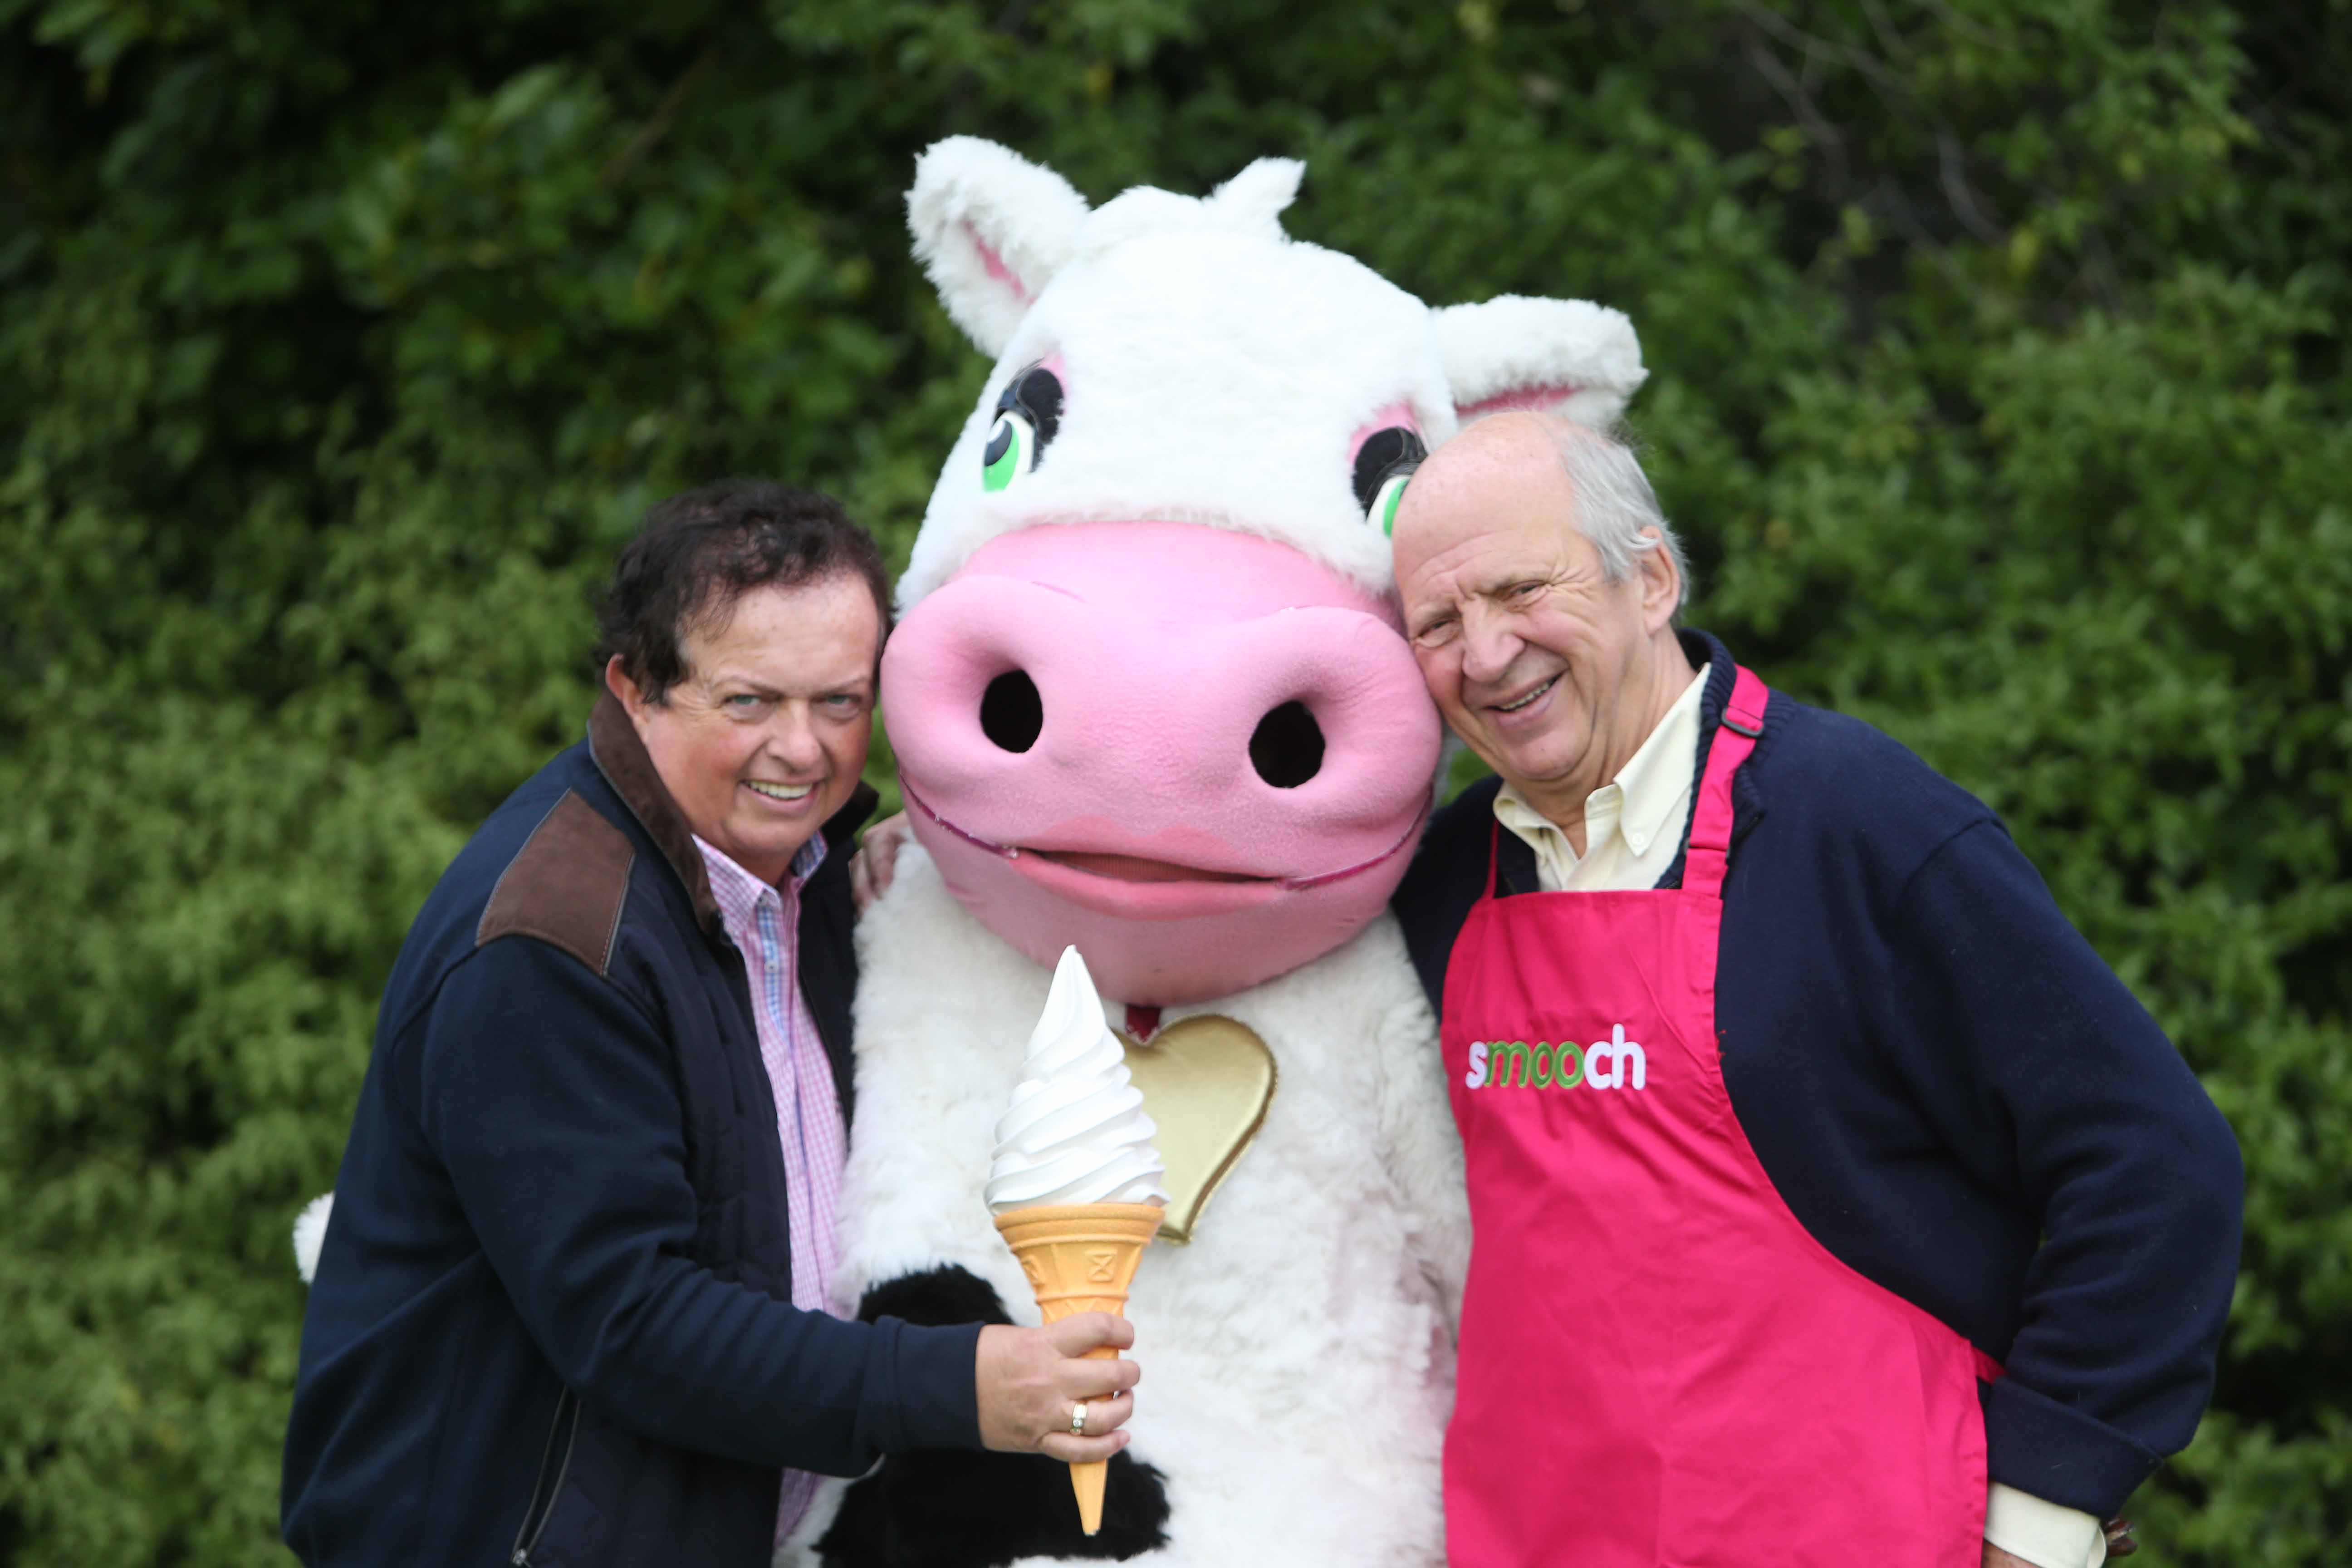 Marty Morrissey, Lola the Cow and the Smooch Ice Cream Party!